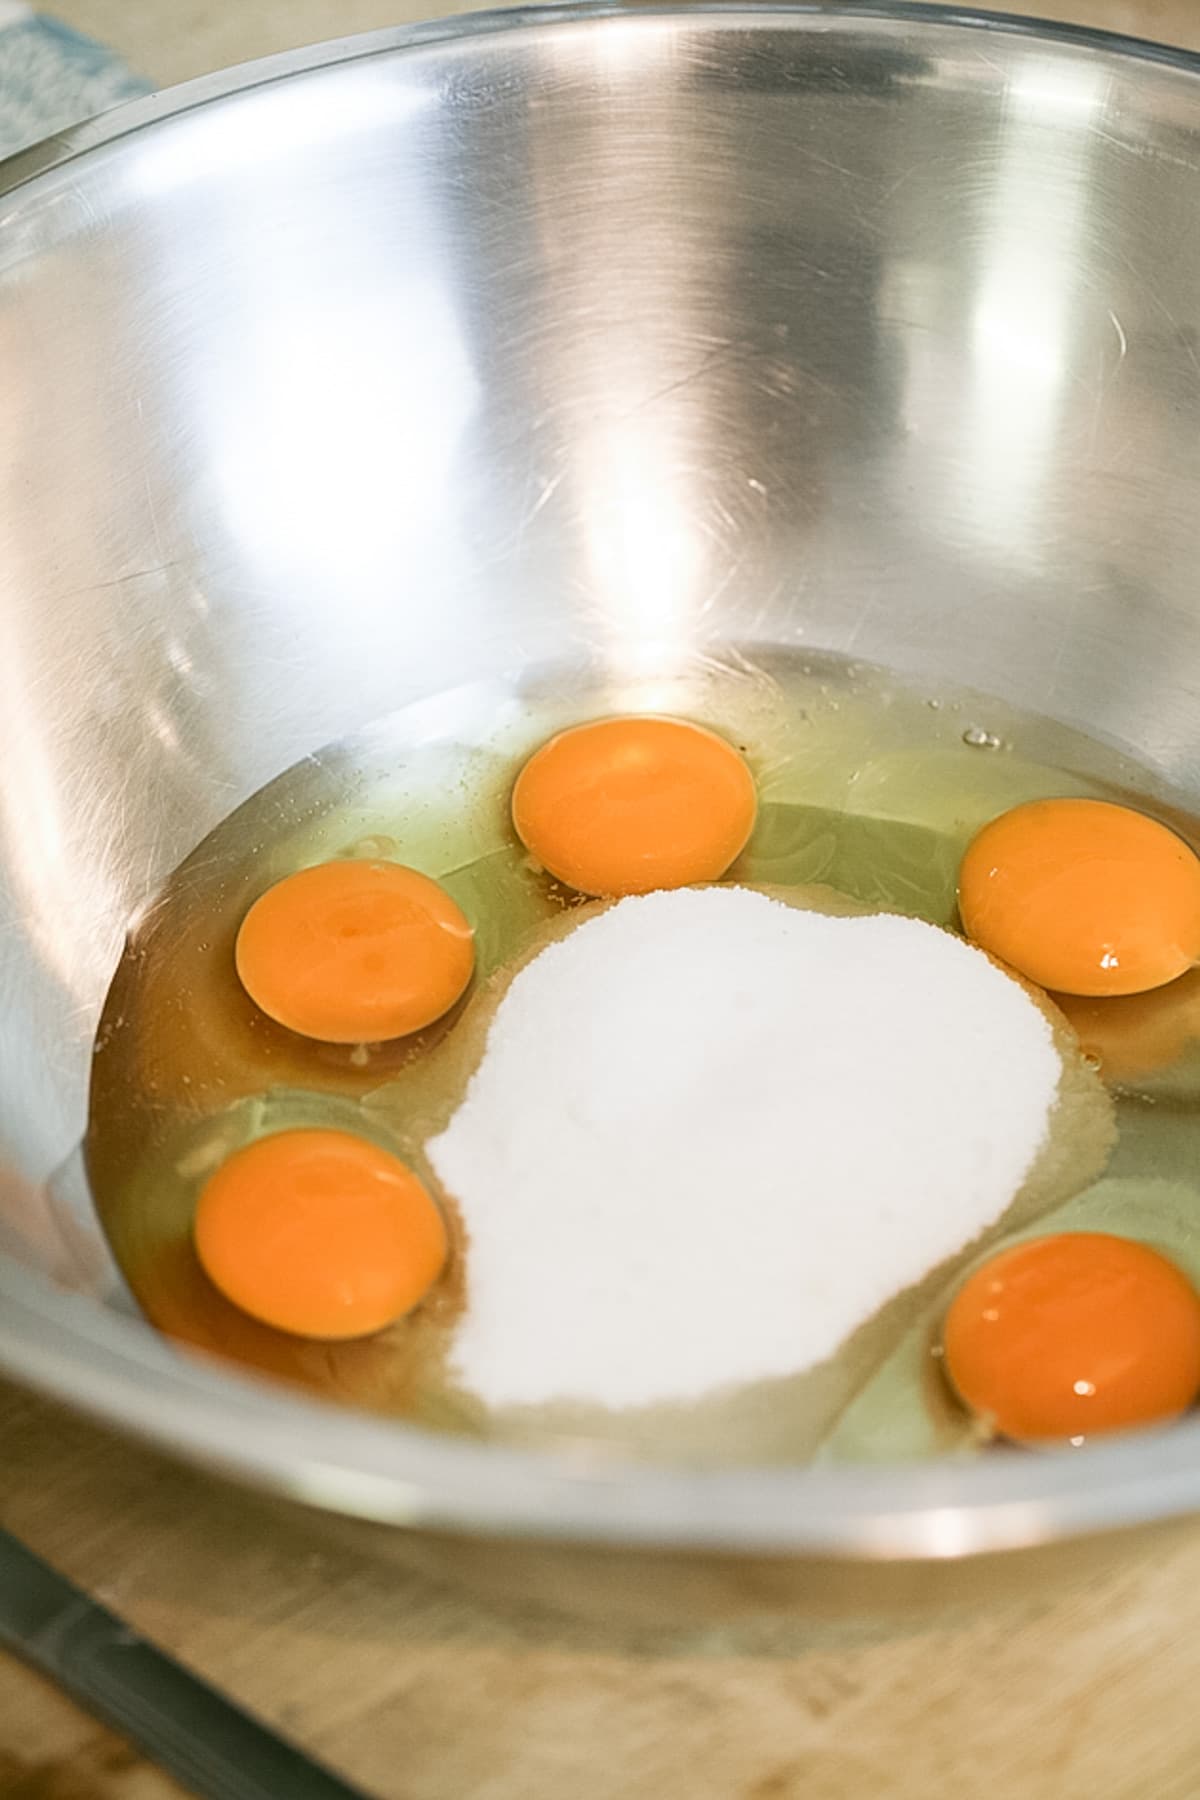 add eggs and sugar to the bowl of the mixer